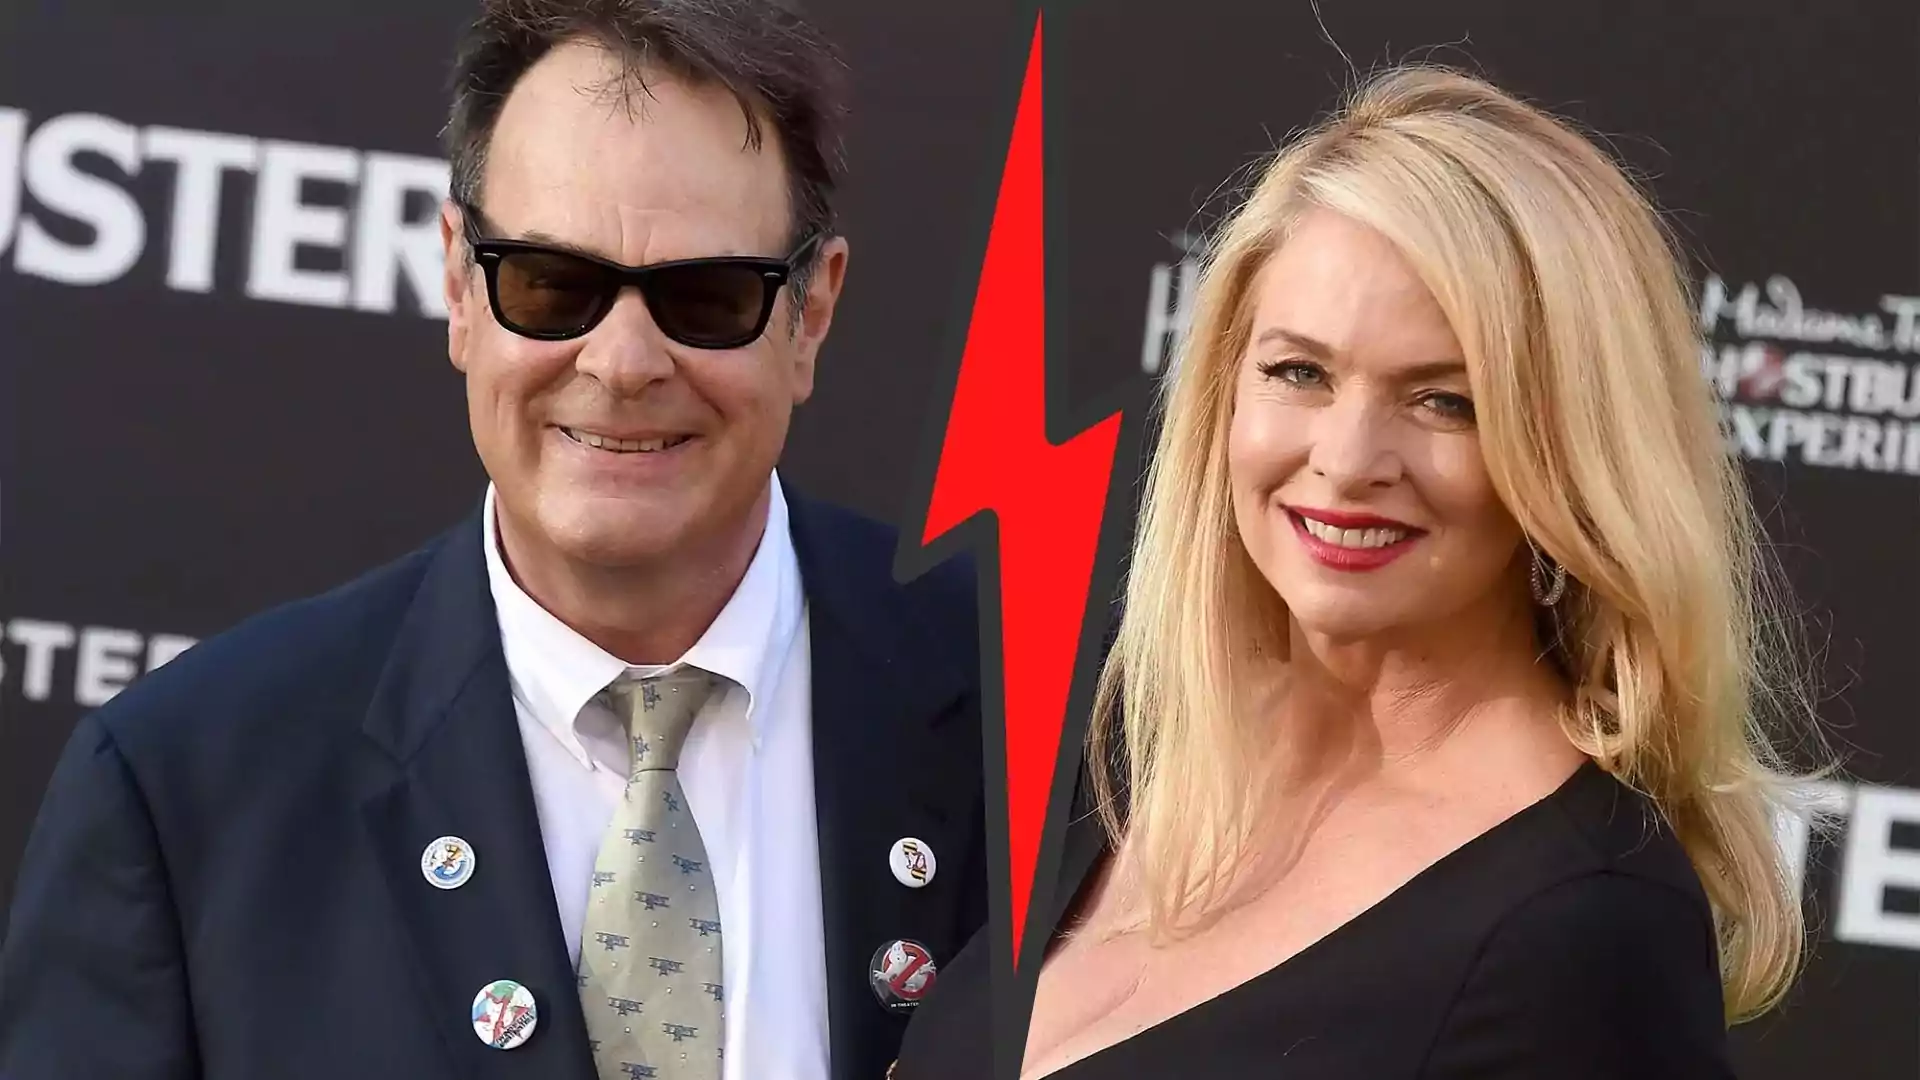 Dan Aykroyd and wife Donna Dixon tearing the knot after 40 years